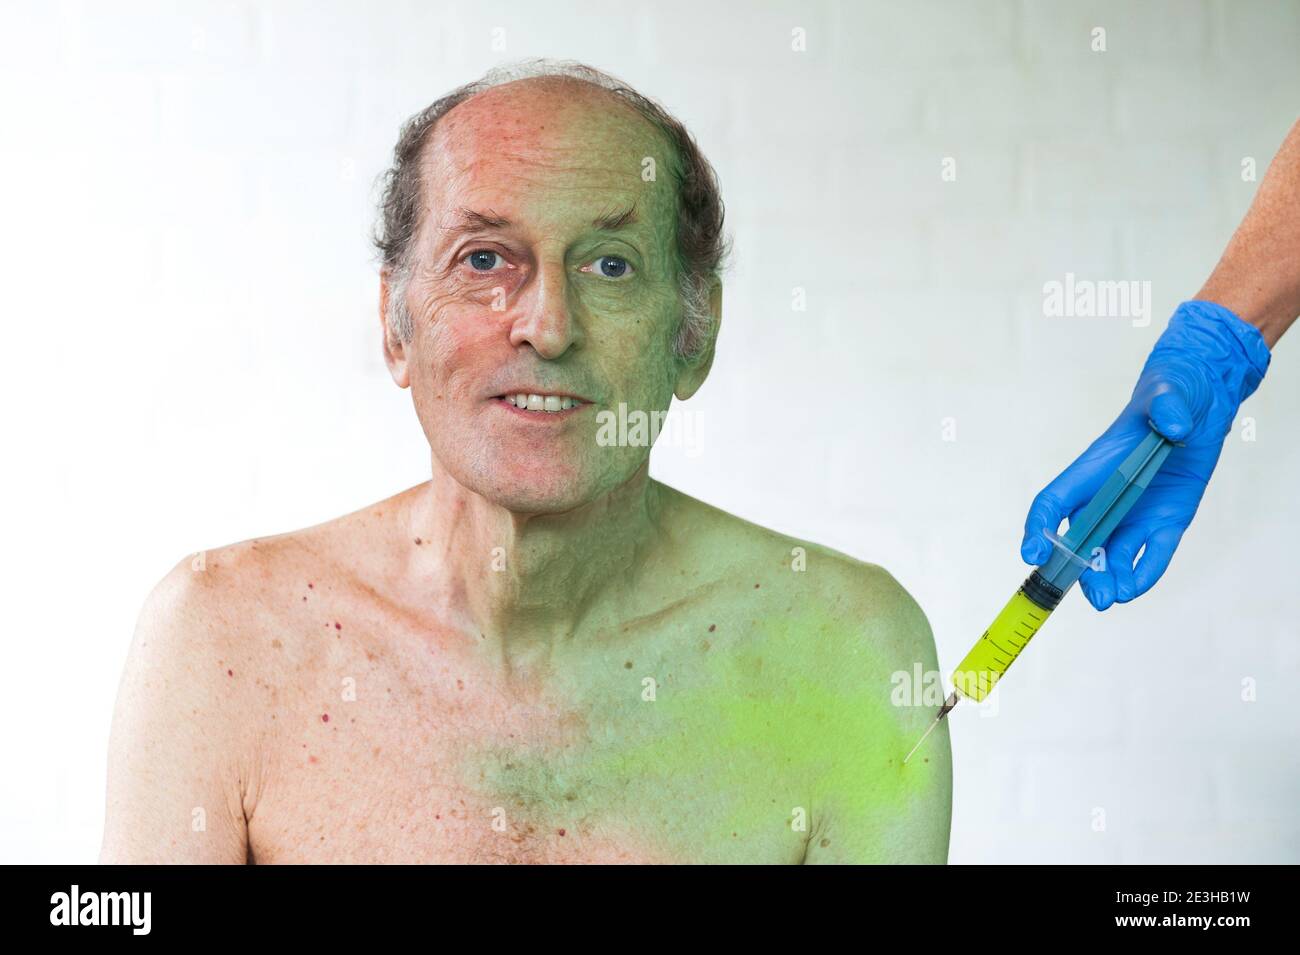 Everywhere in the world - December 2020: Covid humour. Representation of the fear of being vaccinated. Selfportrait of the photographer. Stock Photo